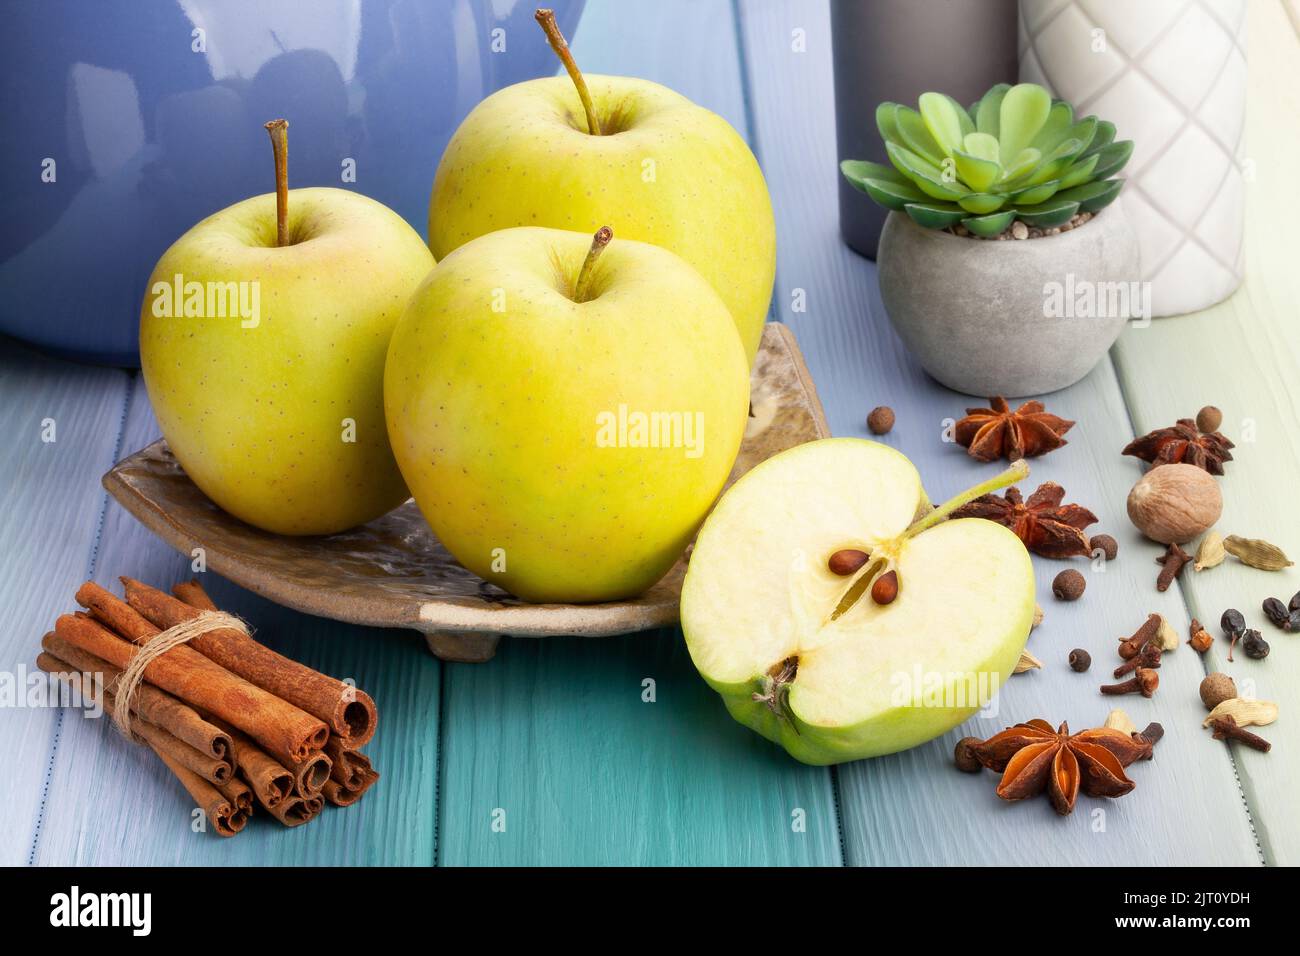 sliced yellow apples on wood background Stock Photo